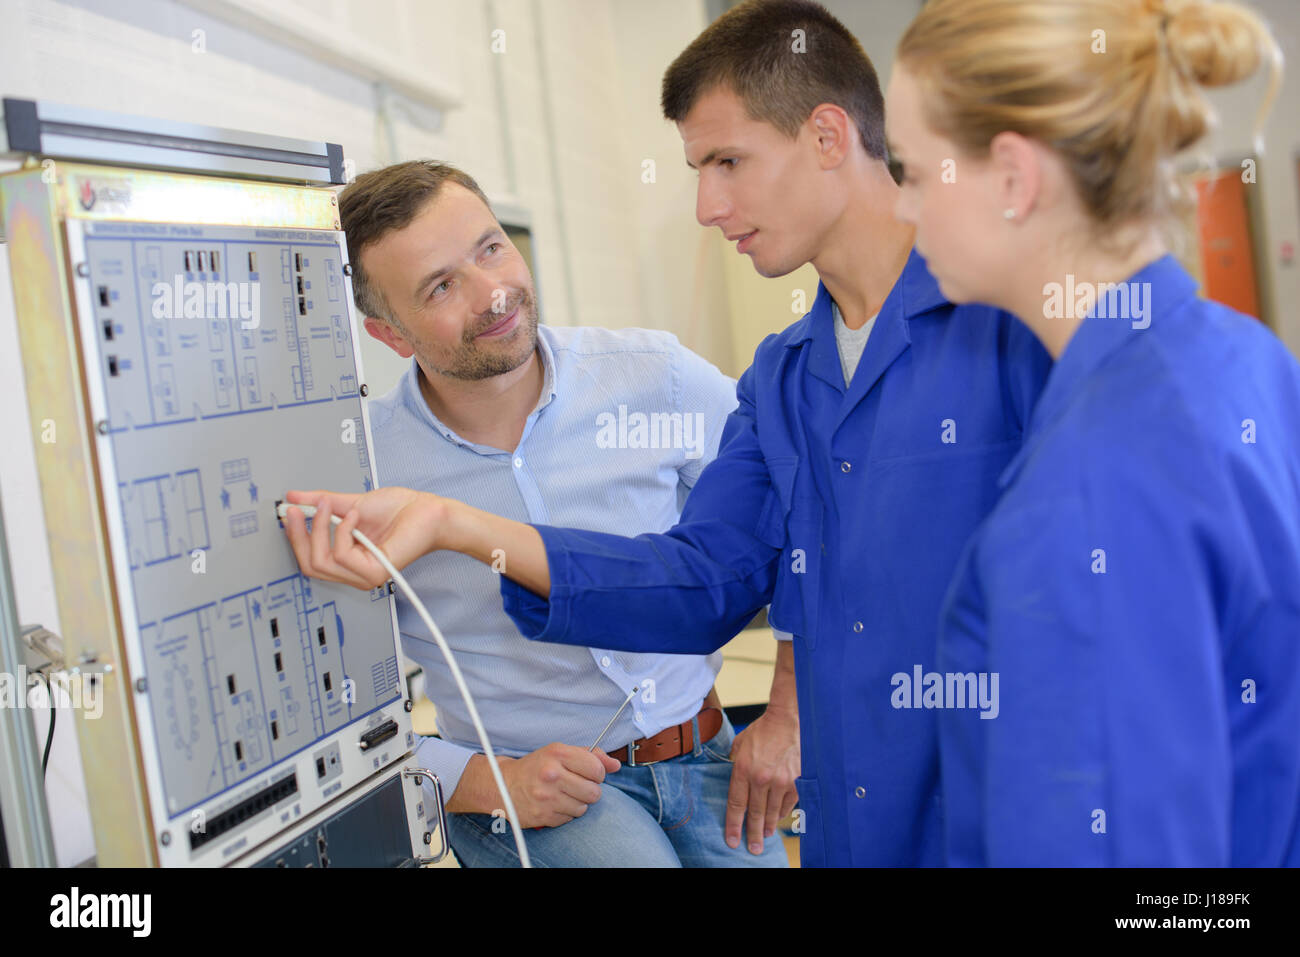 testing the future electricians Stock Photo